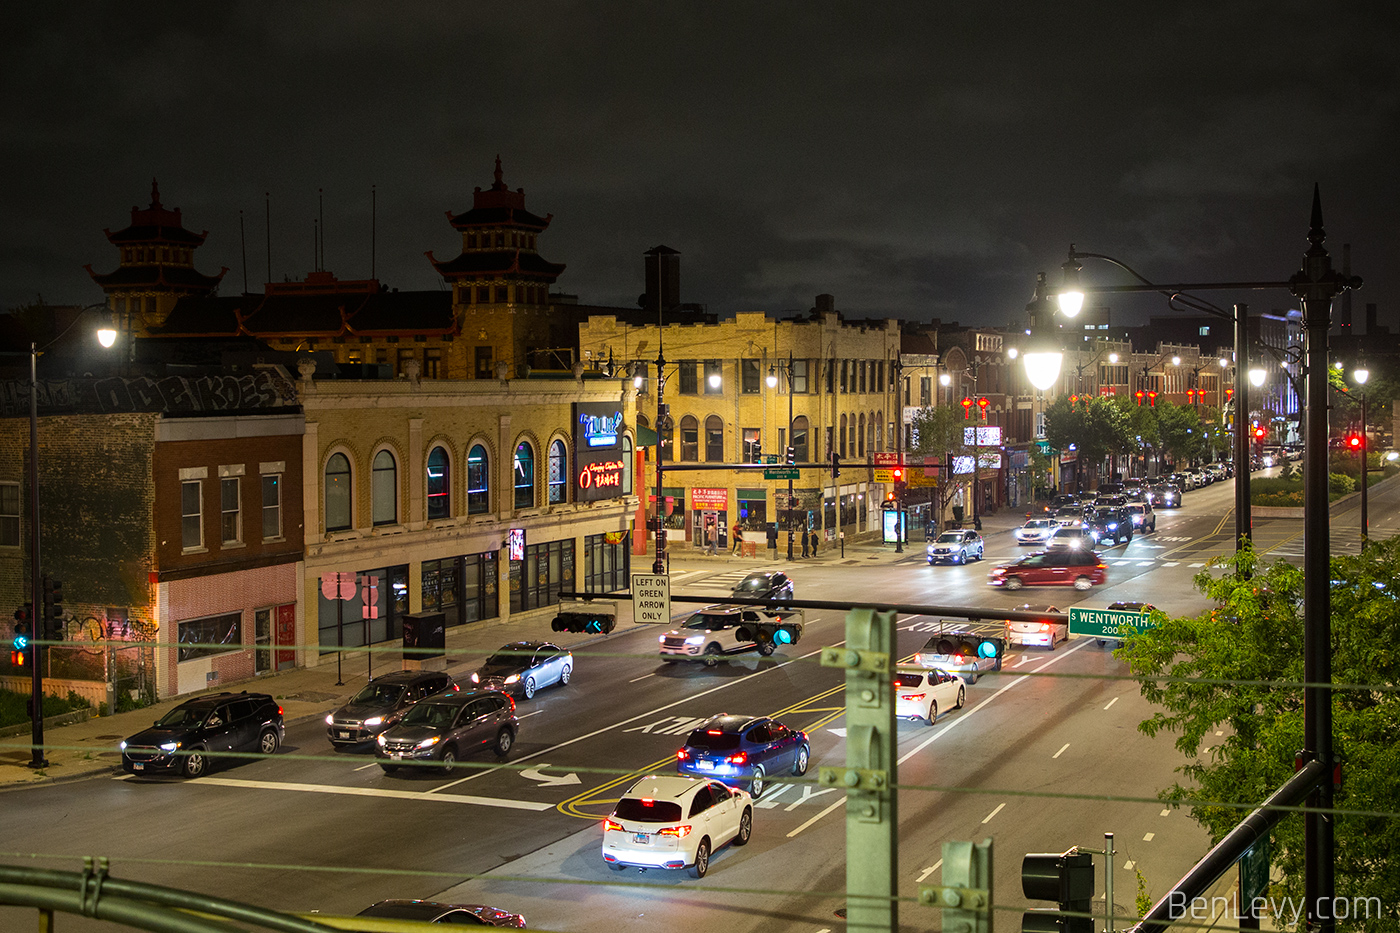 Chinatown as seen from the Red Line Station at night